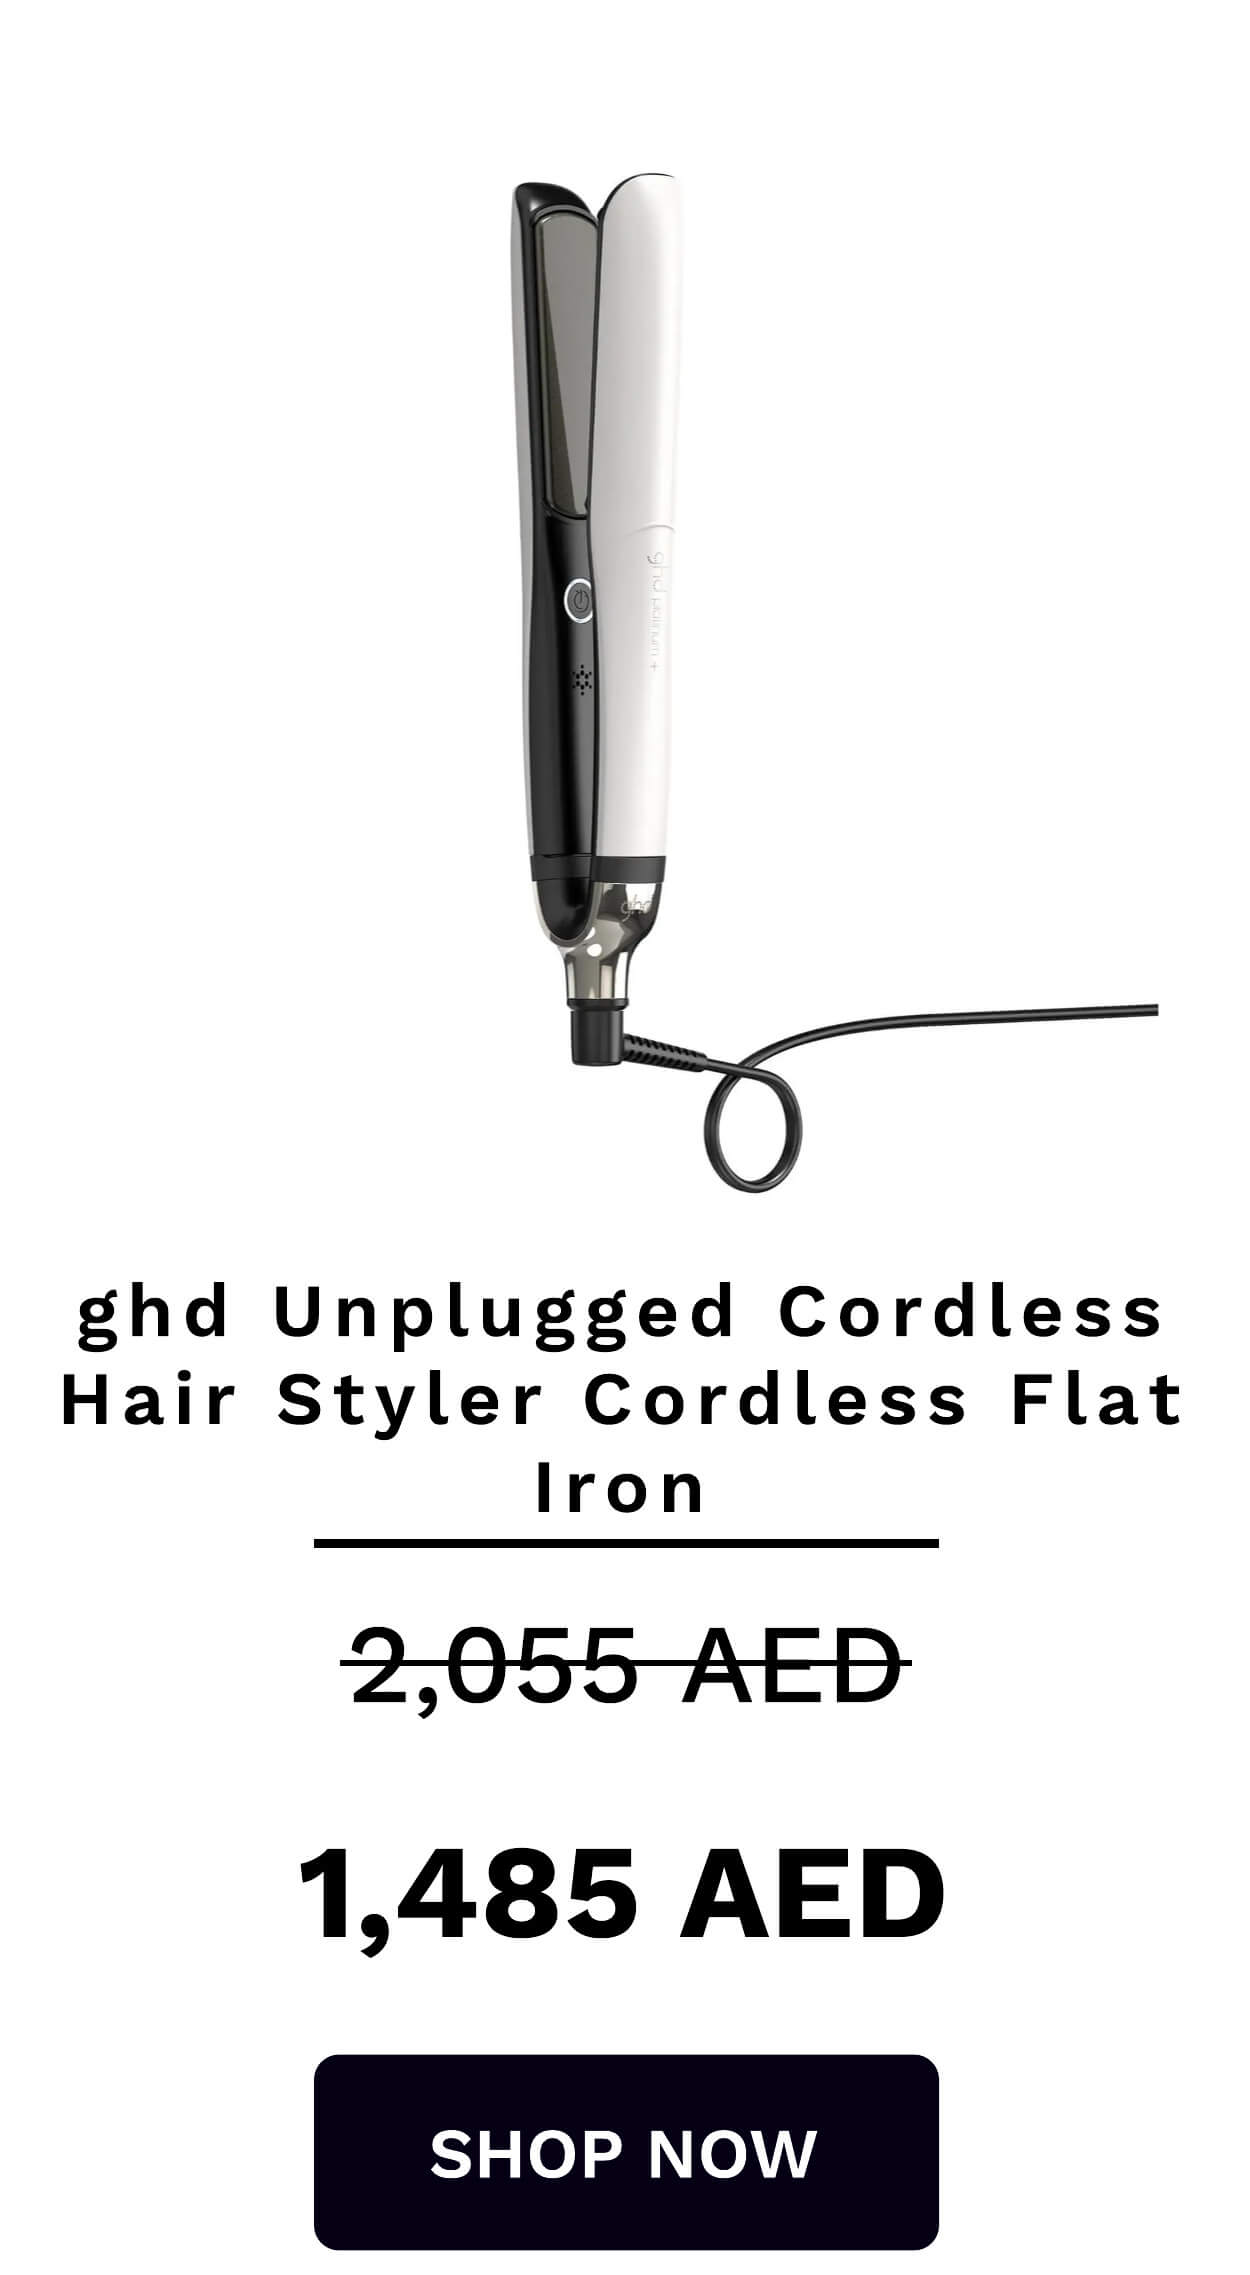 ghd Unplugged Cordless Hair Styler Cordless Flat Iron 2,055-AED 1,485 AED SHOP NOW 